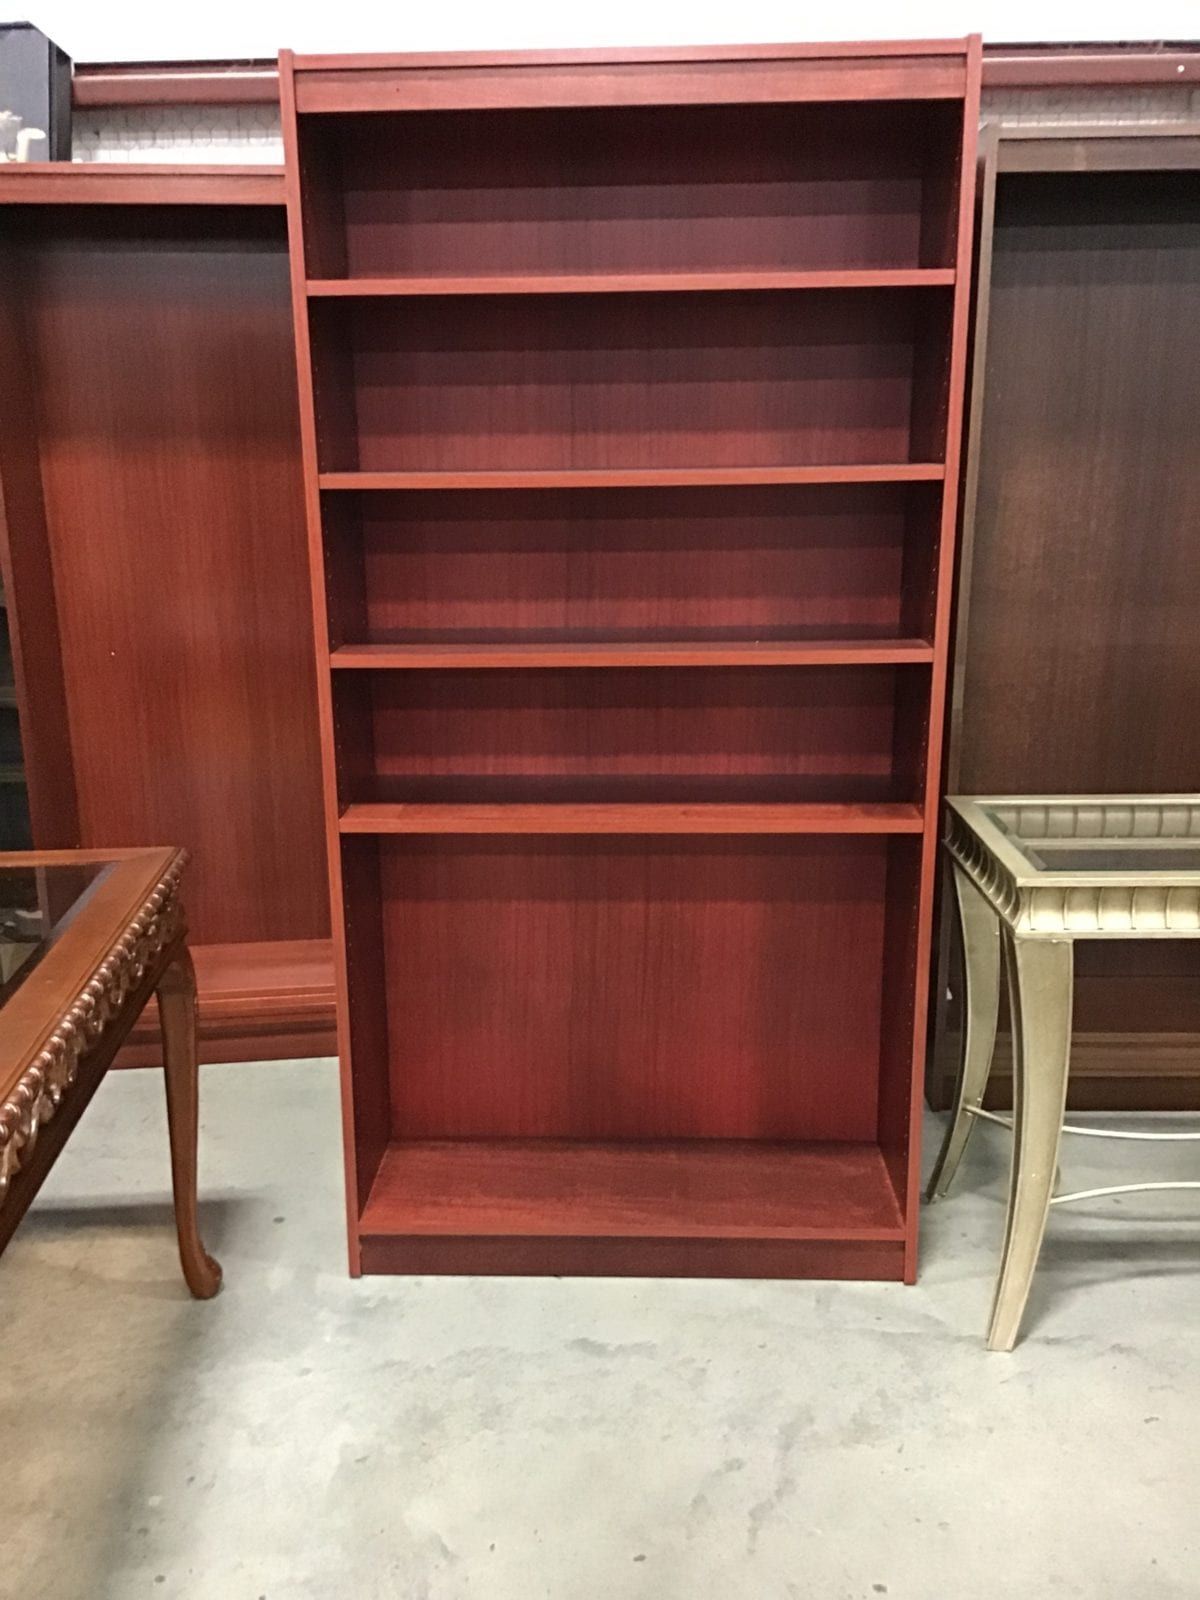 72" X 36" Cherry Bookcase By: Norsons | Office Barn Pertaining To Cherry Bookcases (View 6 of 15)